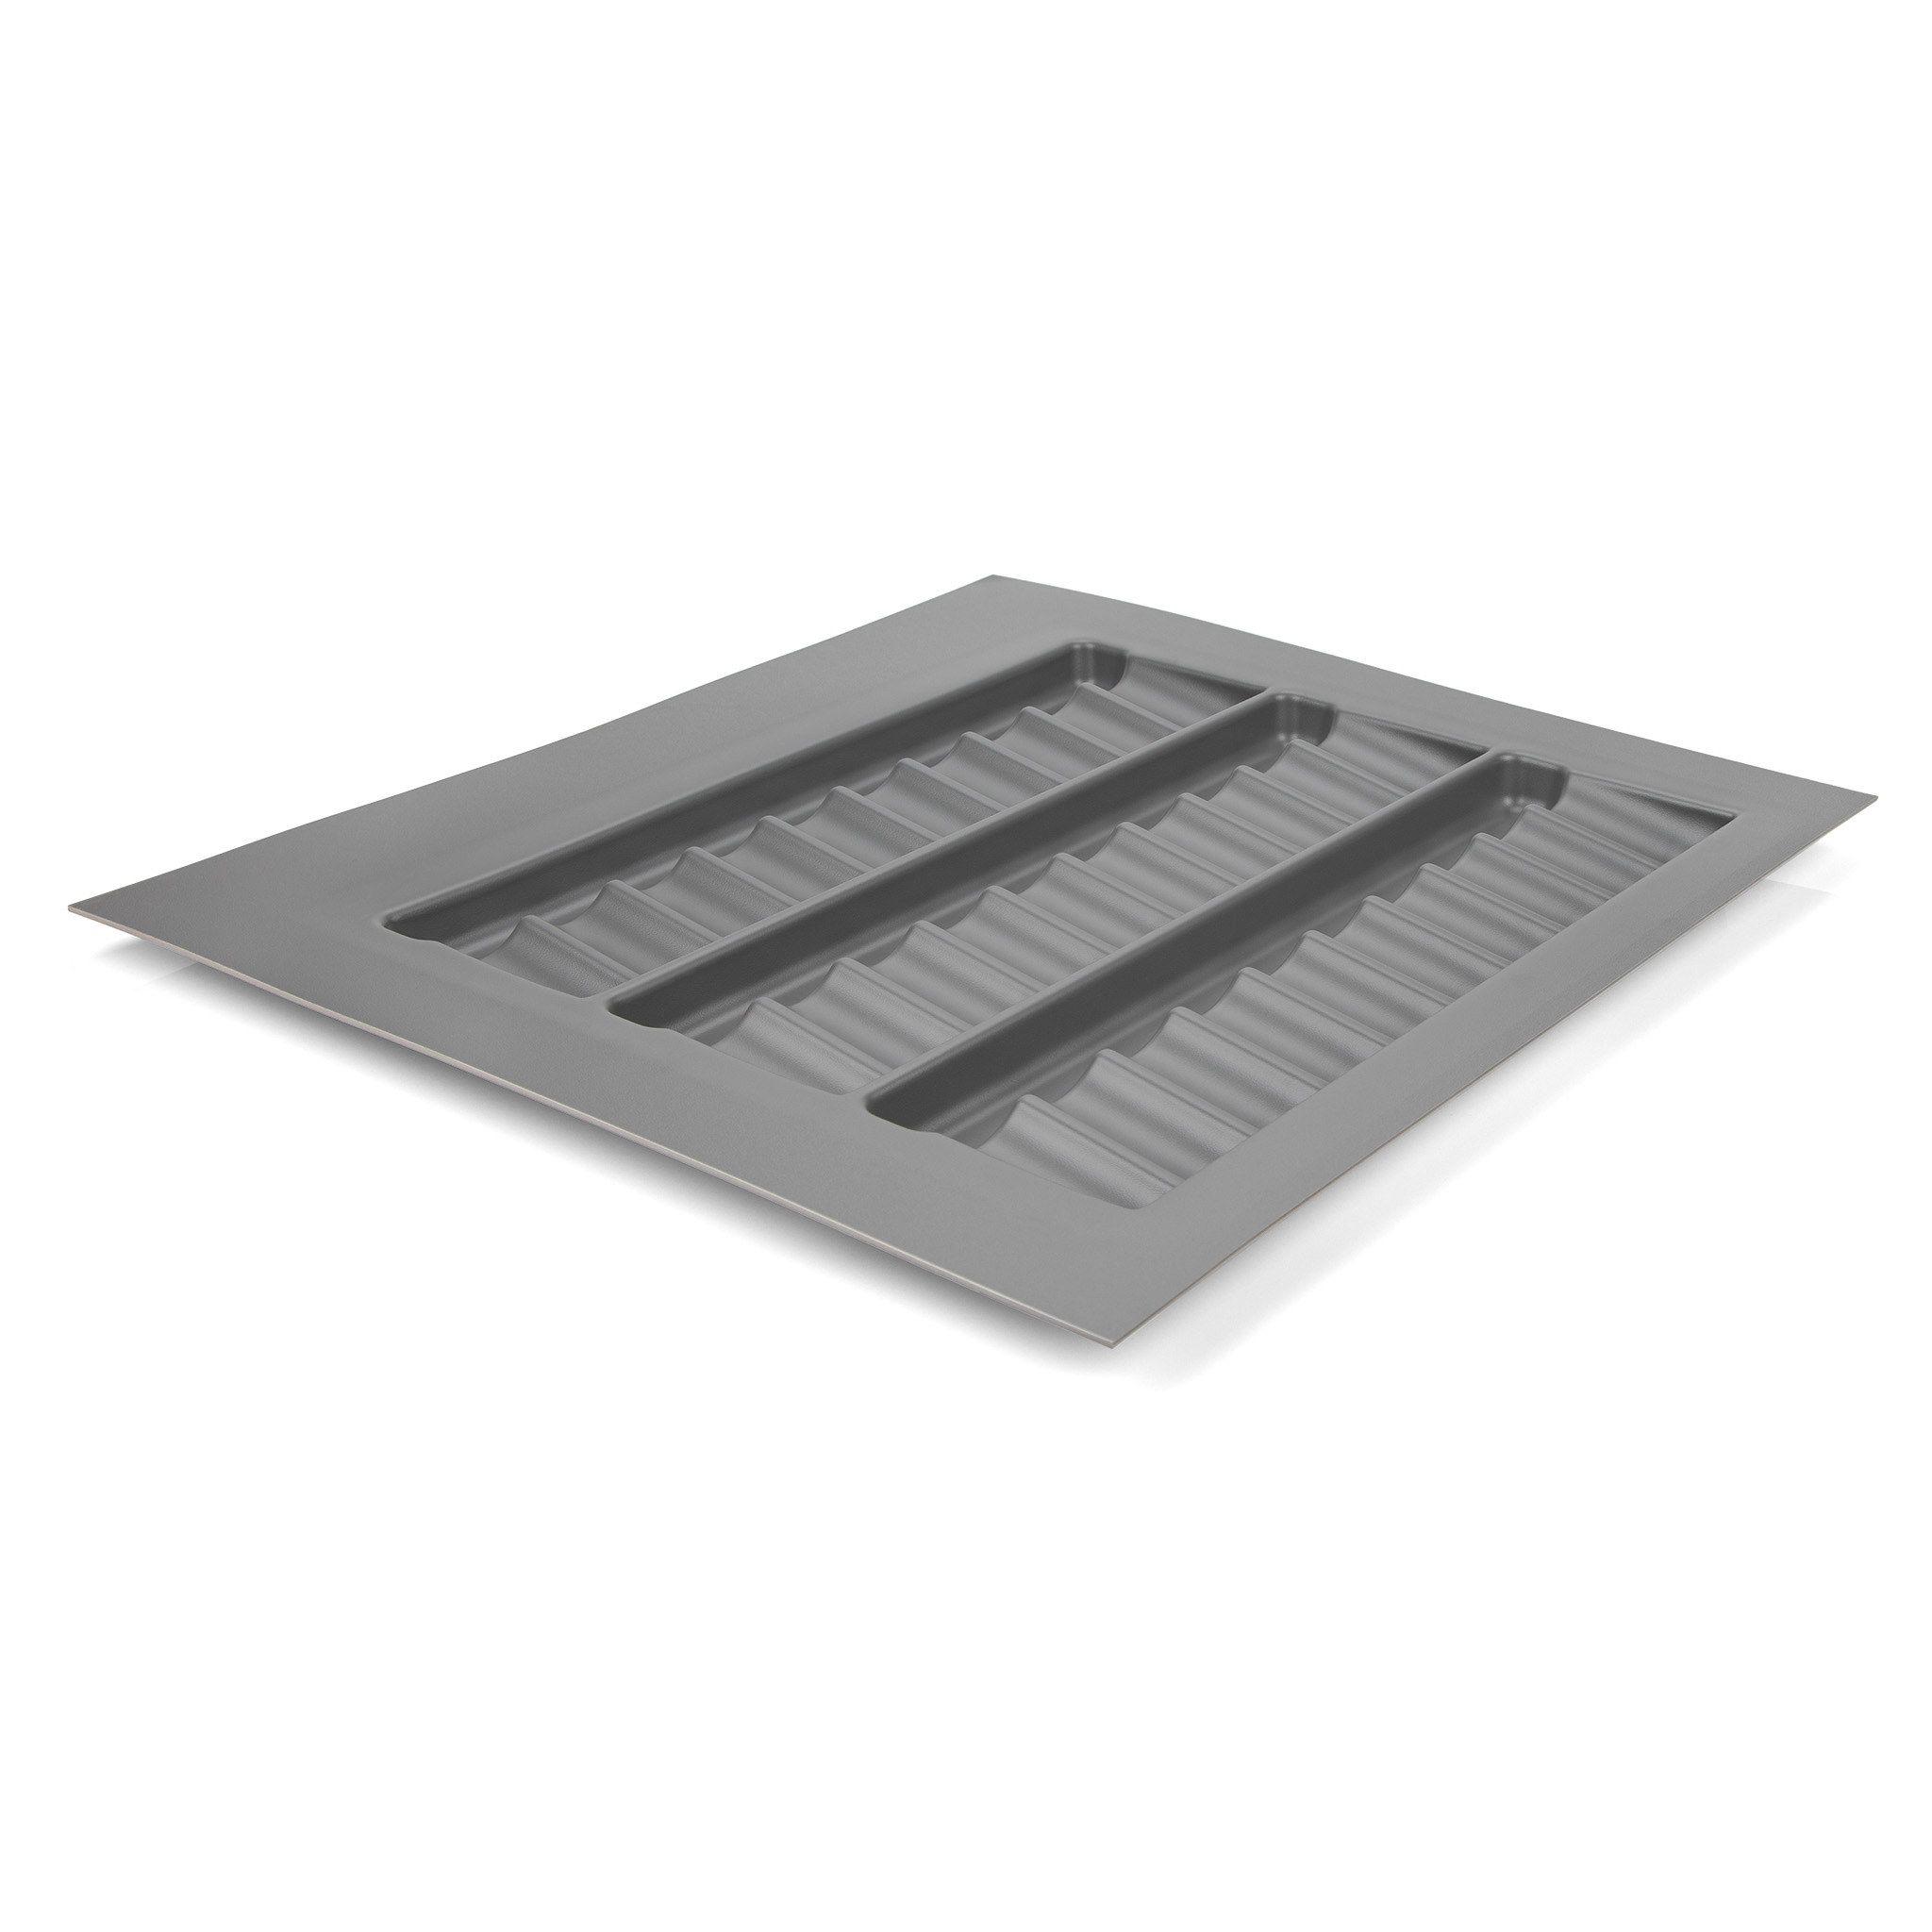 Area Spice Tray Organizers, 480mm - 600mm, Grey Matte